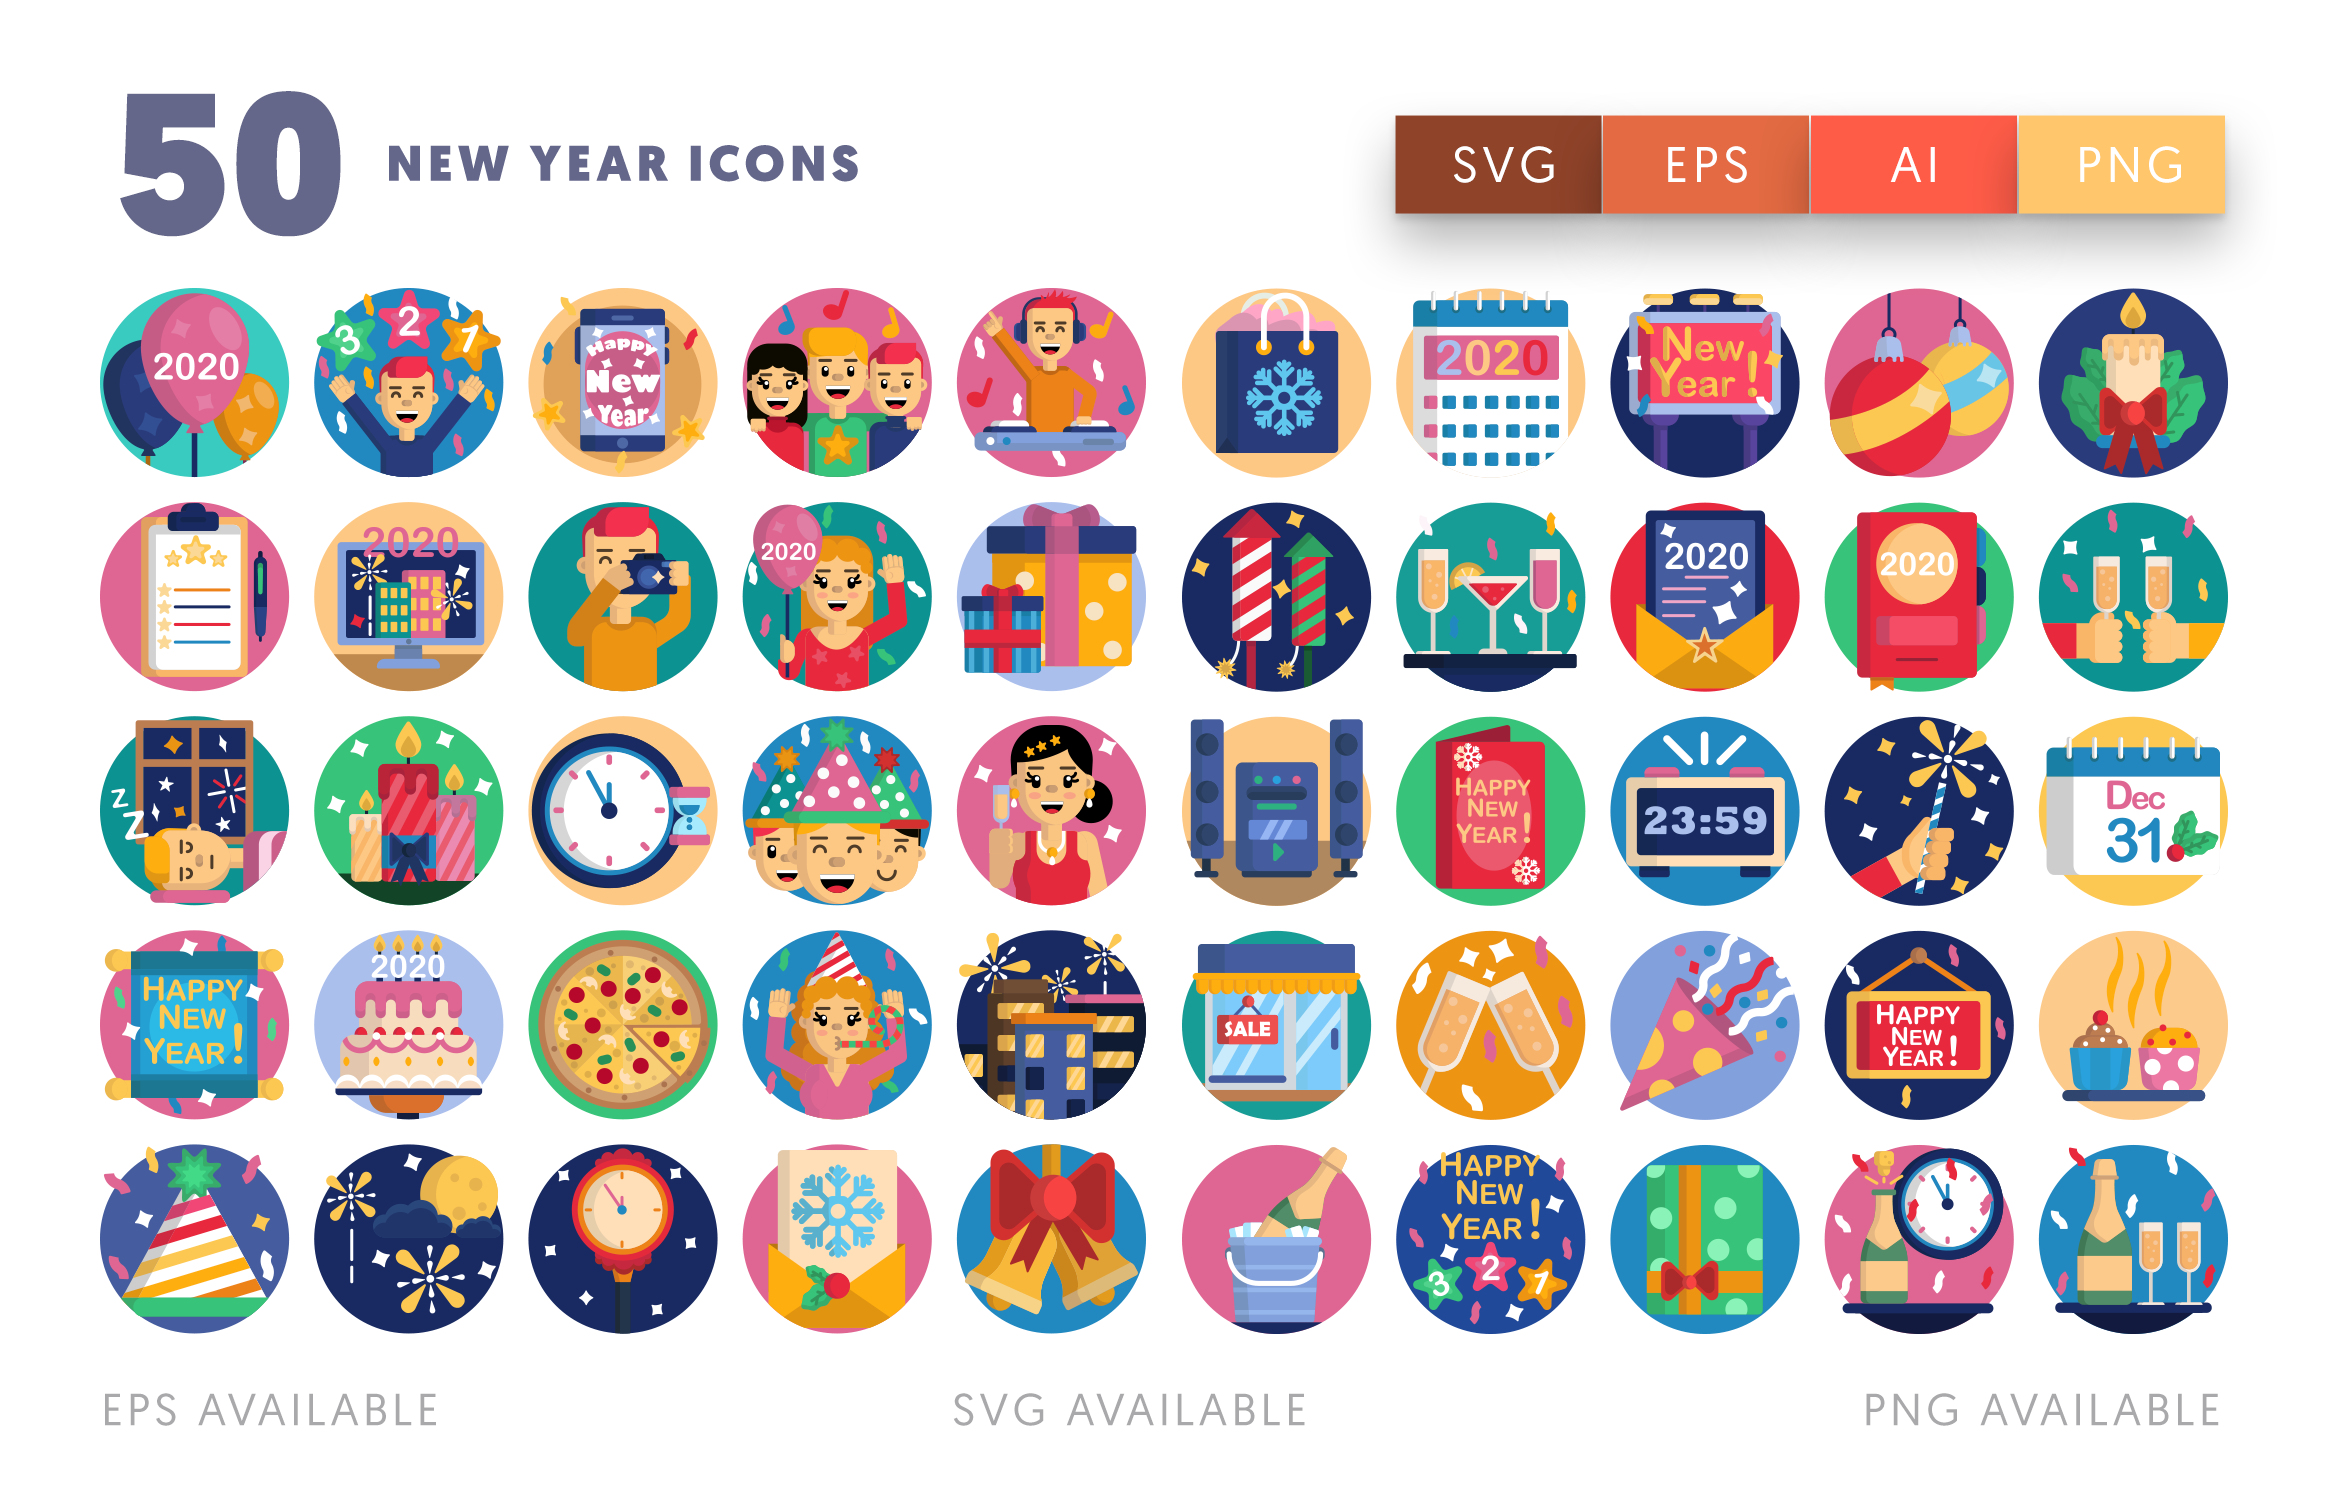 50 New Year Icons